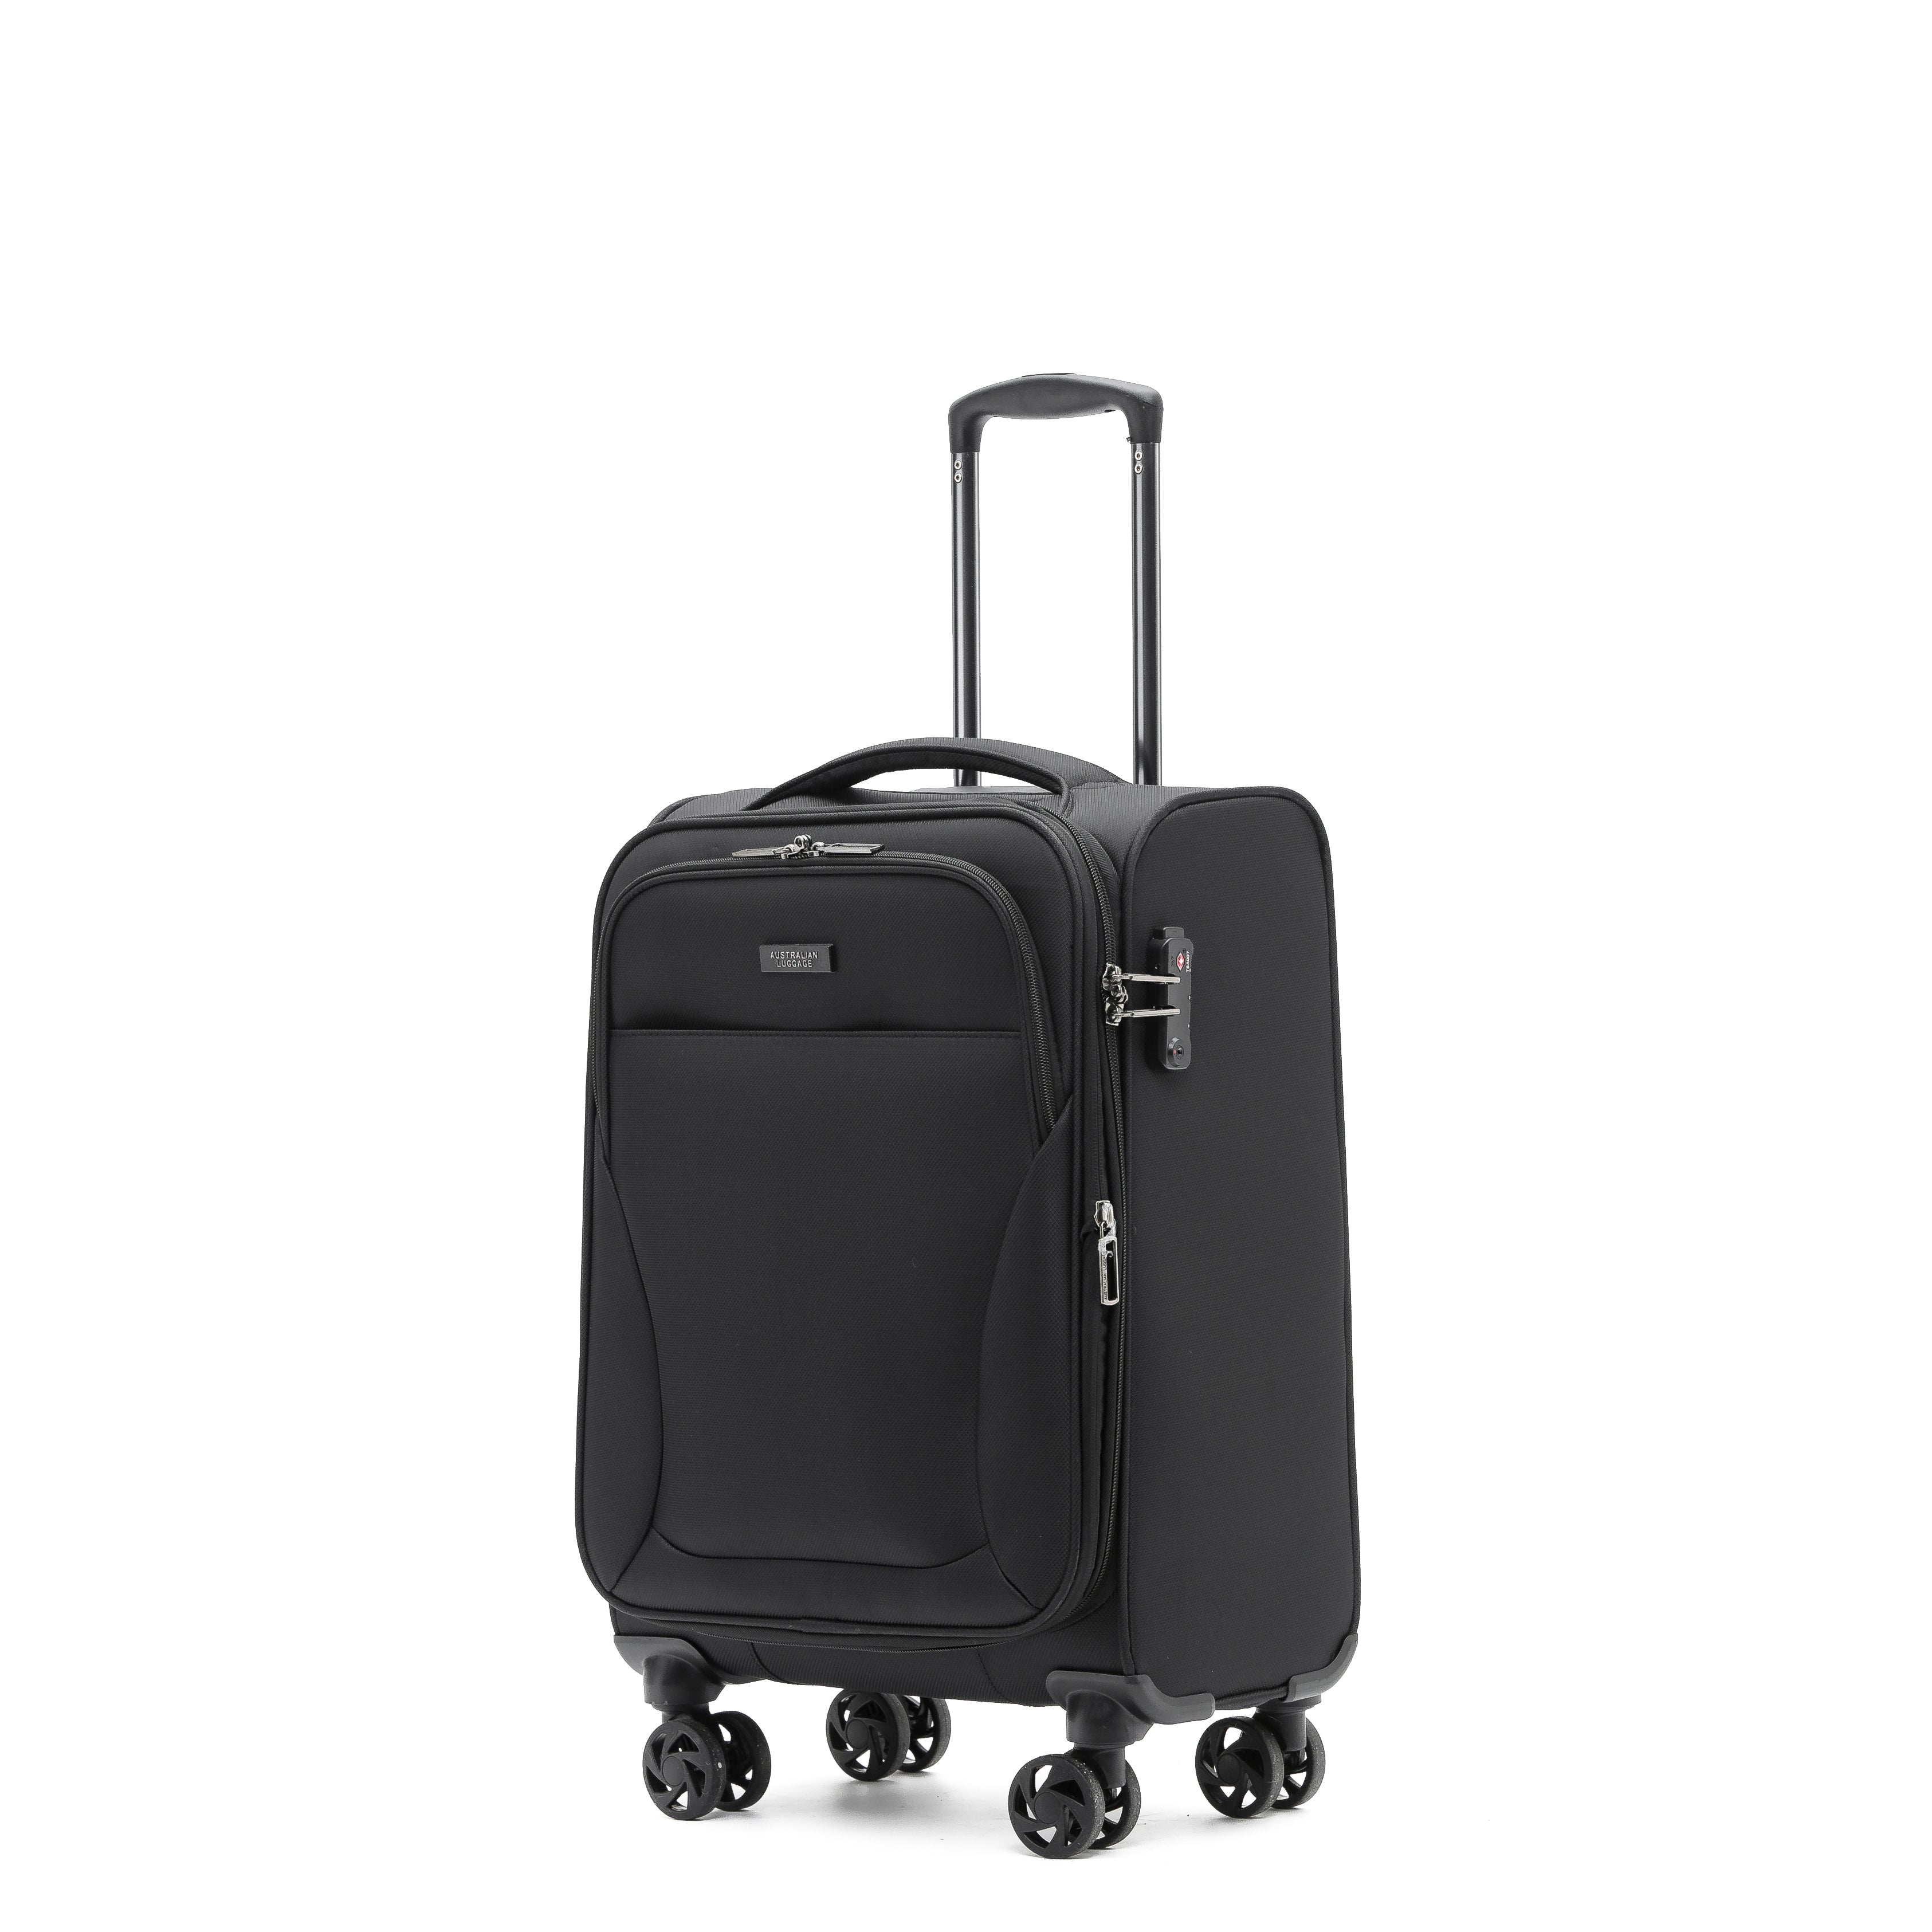 AUS LUGGAGE - WINGS Trolley Case 20in Small - BLACK - 0